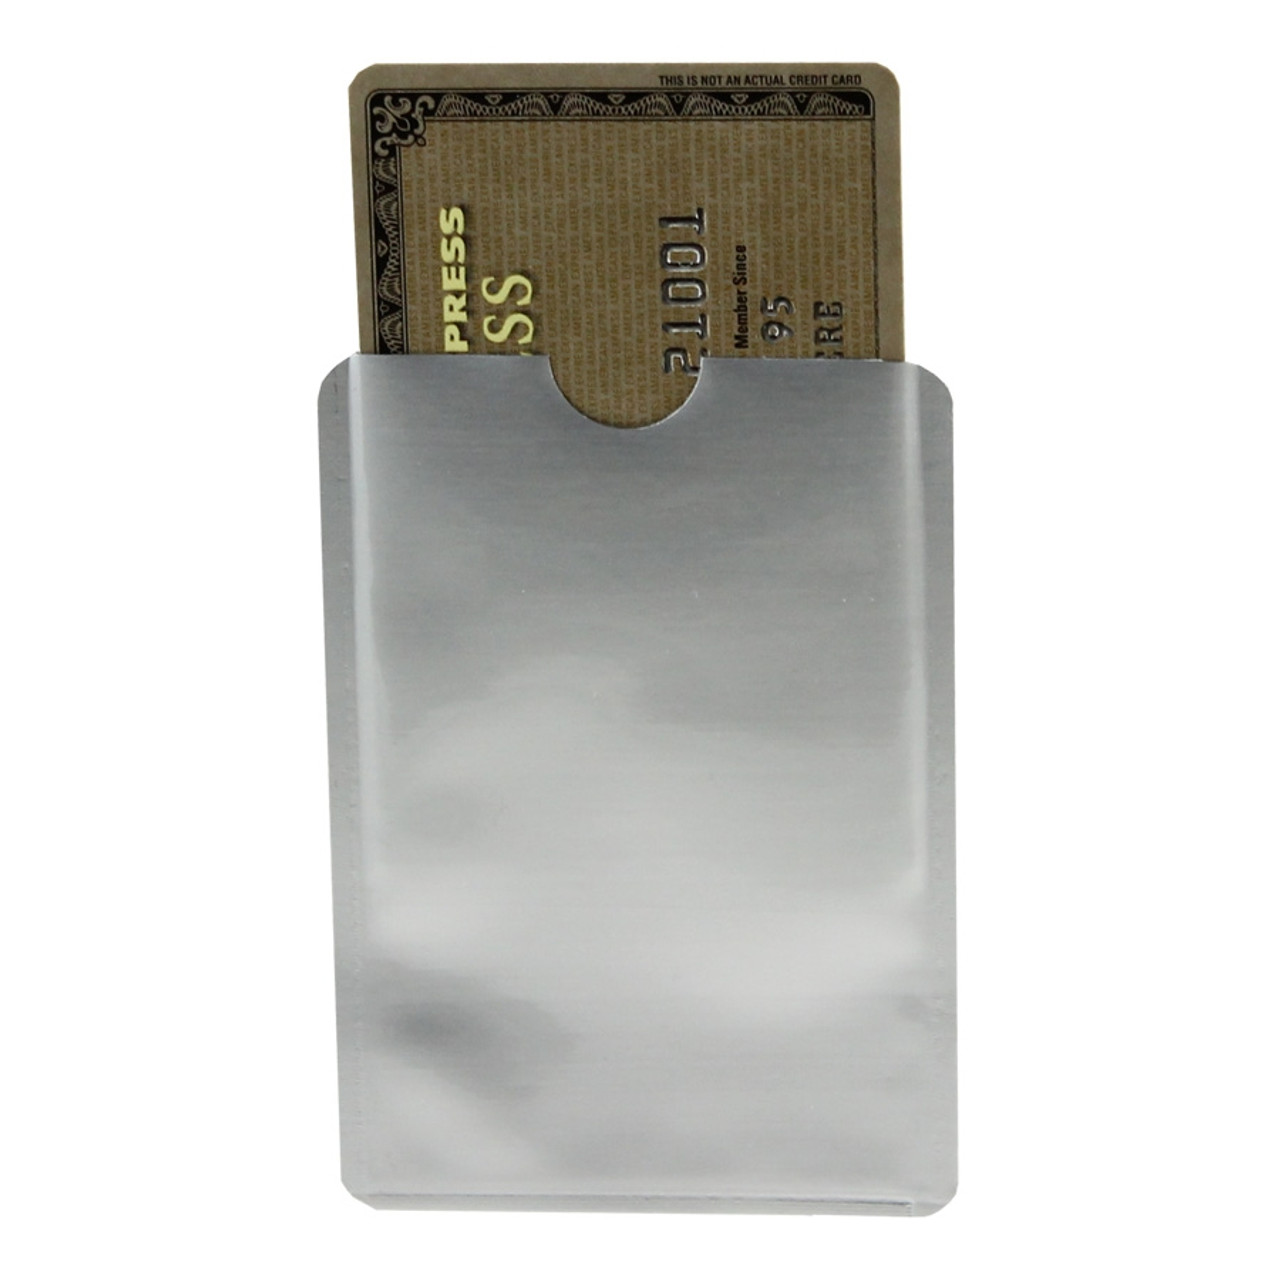 RFID Wallet Key Ring Mini - Protective Wallet for Credit Cards - RFID Blocking L